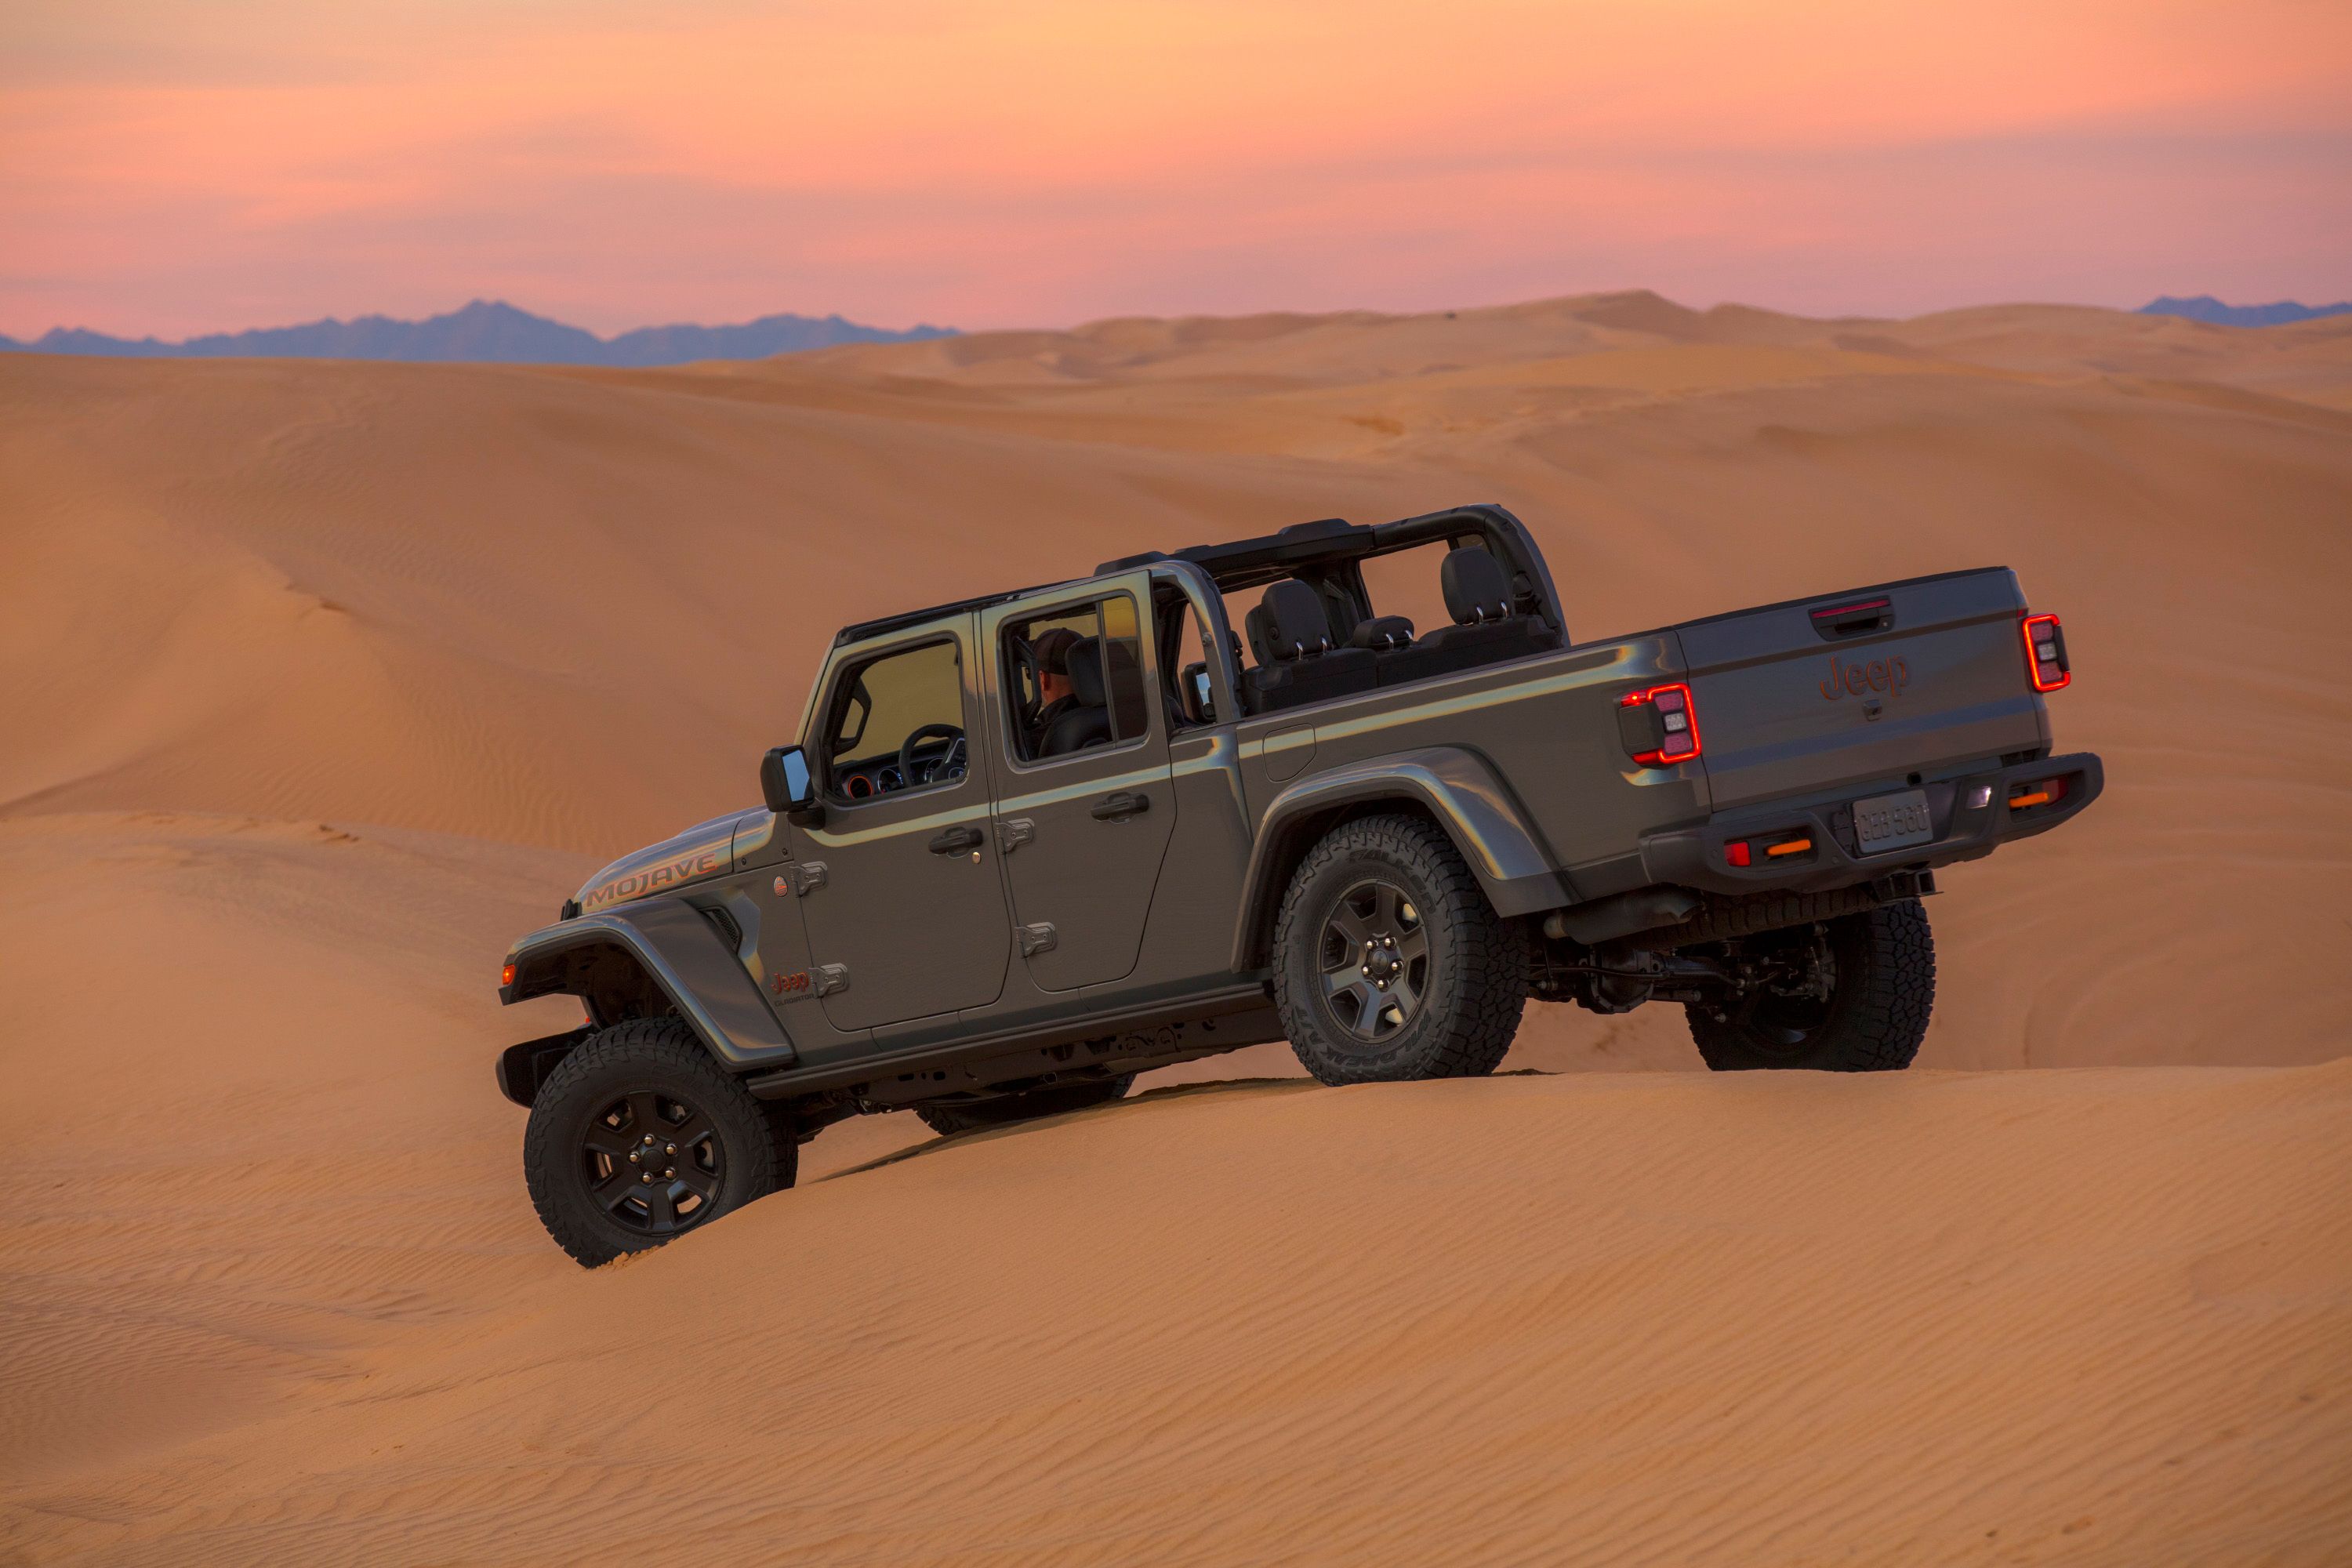 2020 Jeep Gladiator Mojave And High Altitude Special Editions